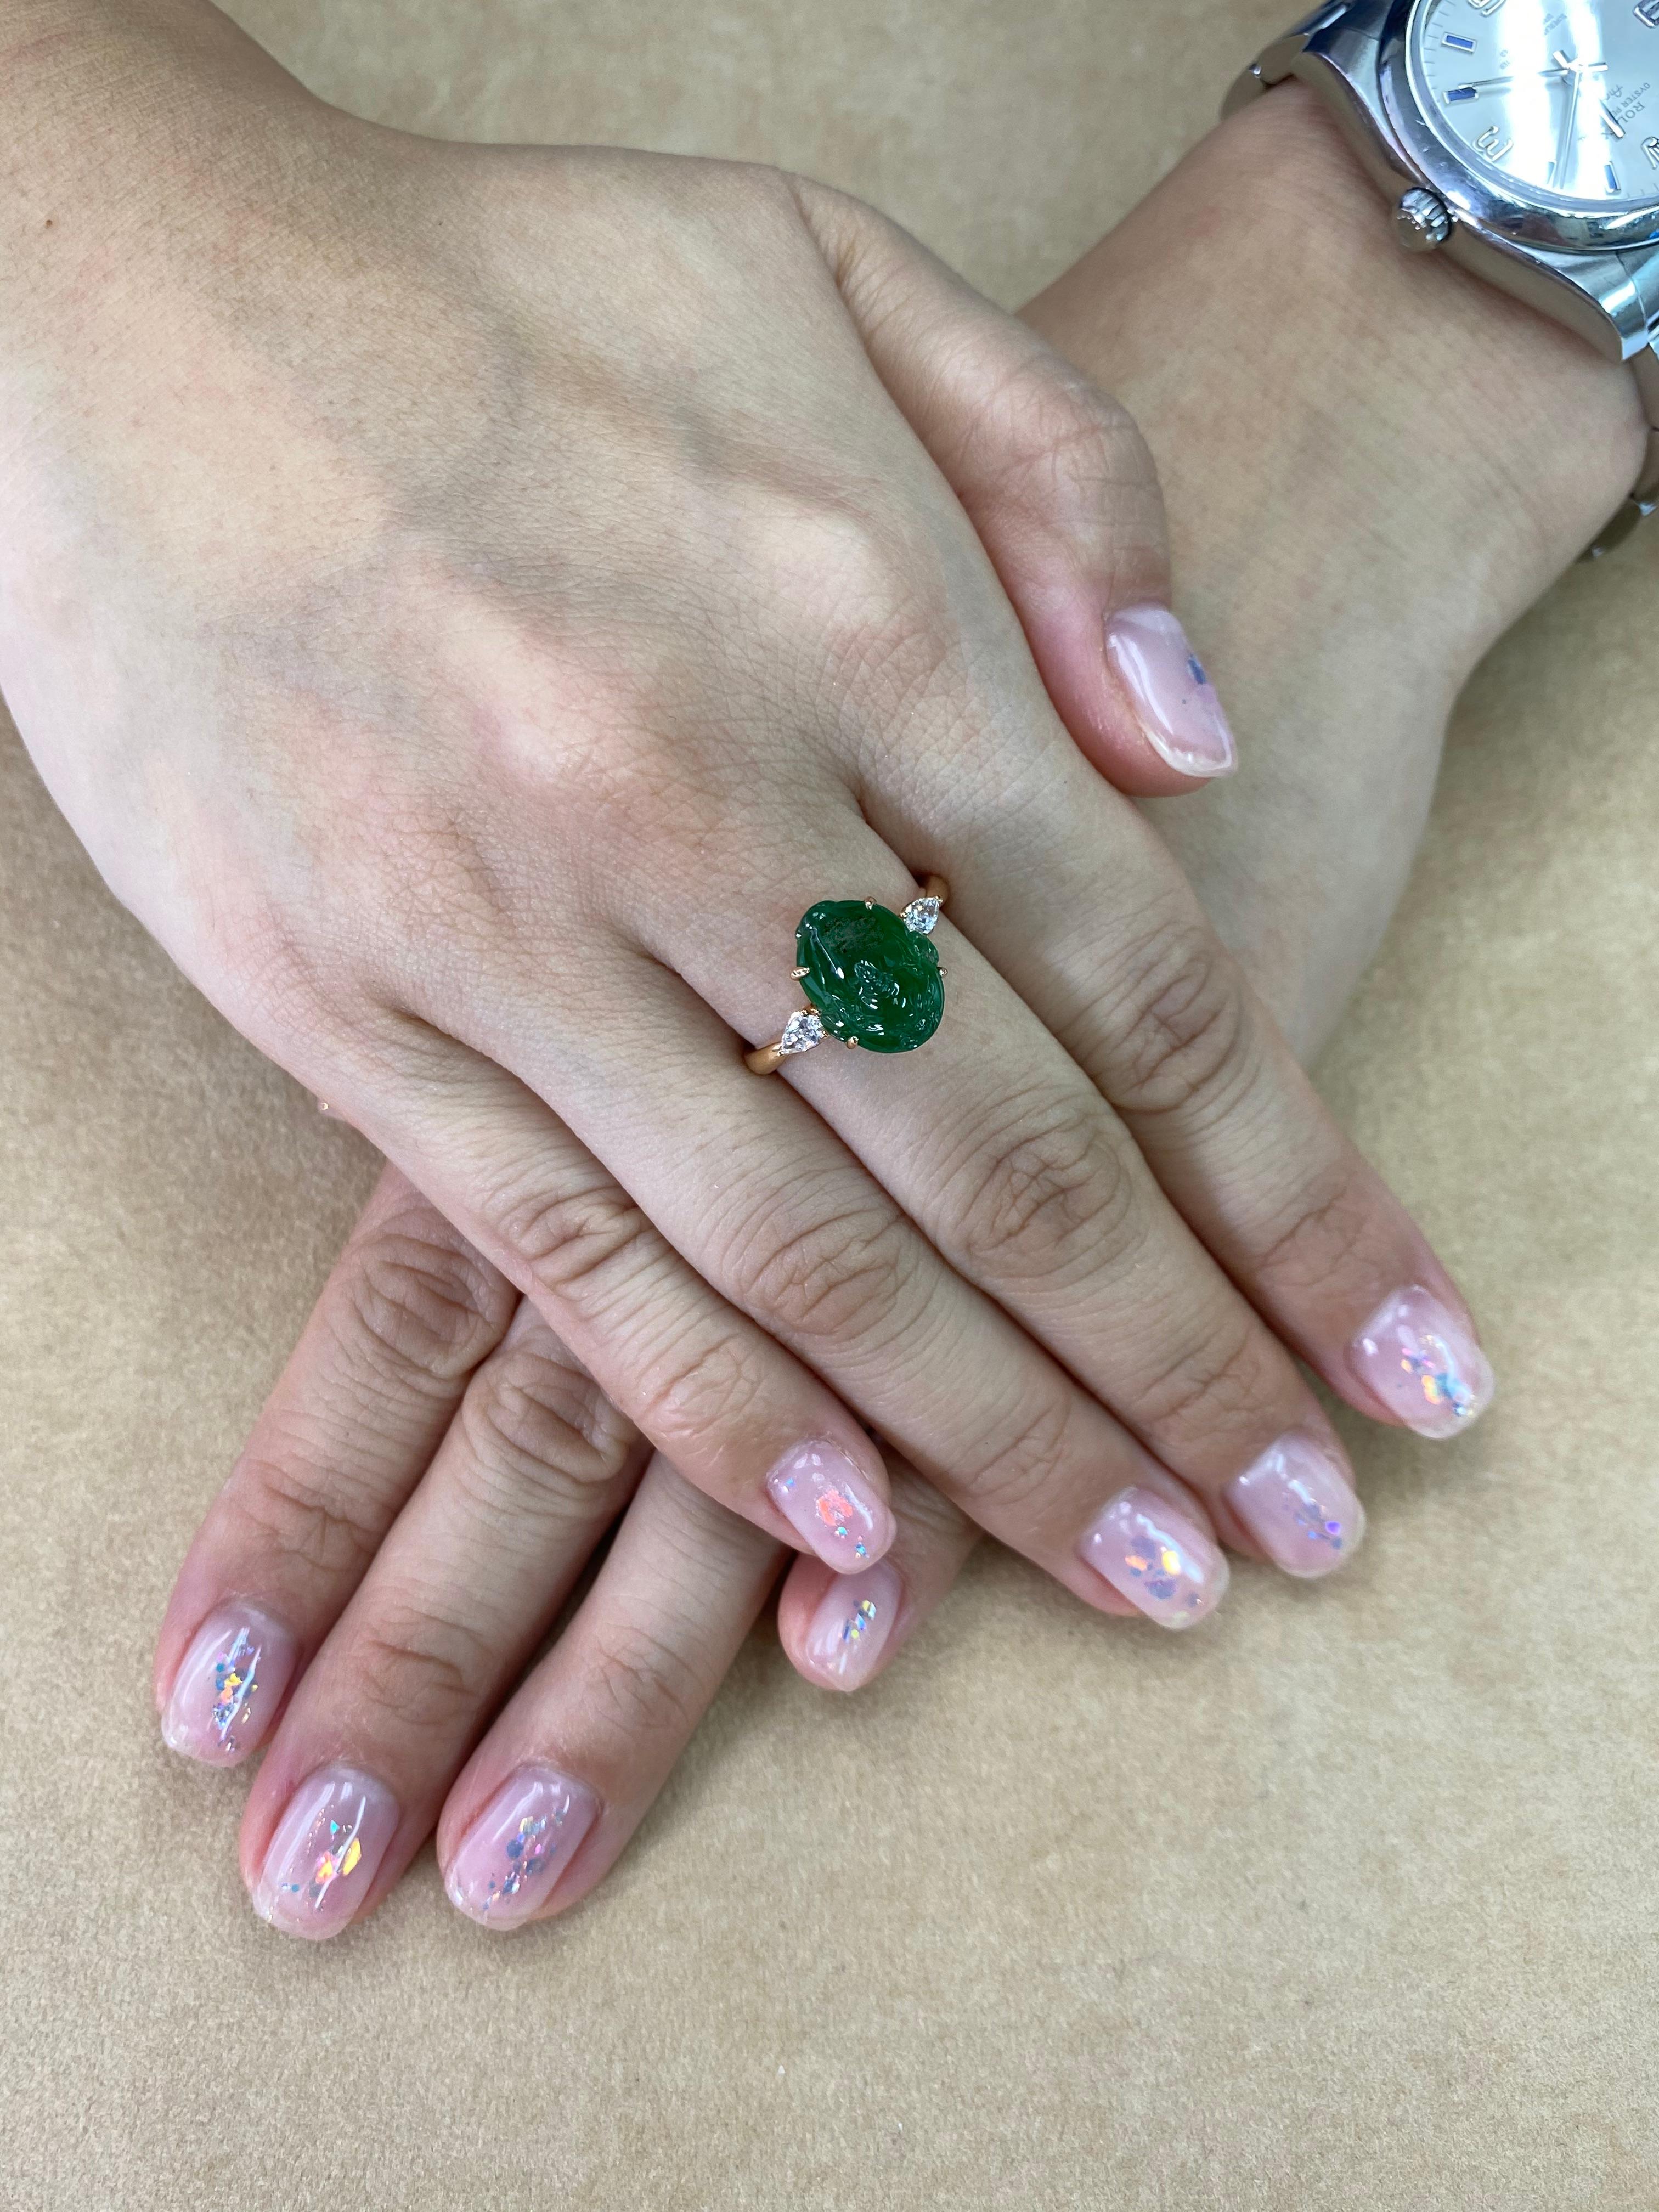 This ring has the best imperial green color, it GLOWS!  Here is an imperial green Jade and diamond ring. It is certified by 2 labs natural jadeite jade. The ring is set in 18k rose gold and diamonds. There are 2 pear shaped diamonds totaling 0.19